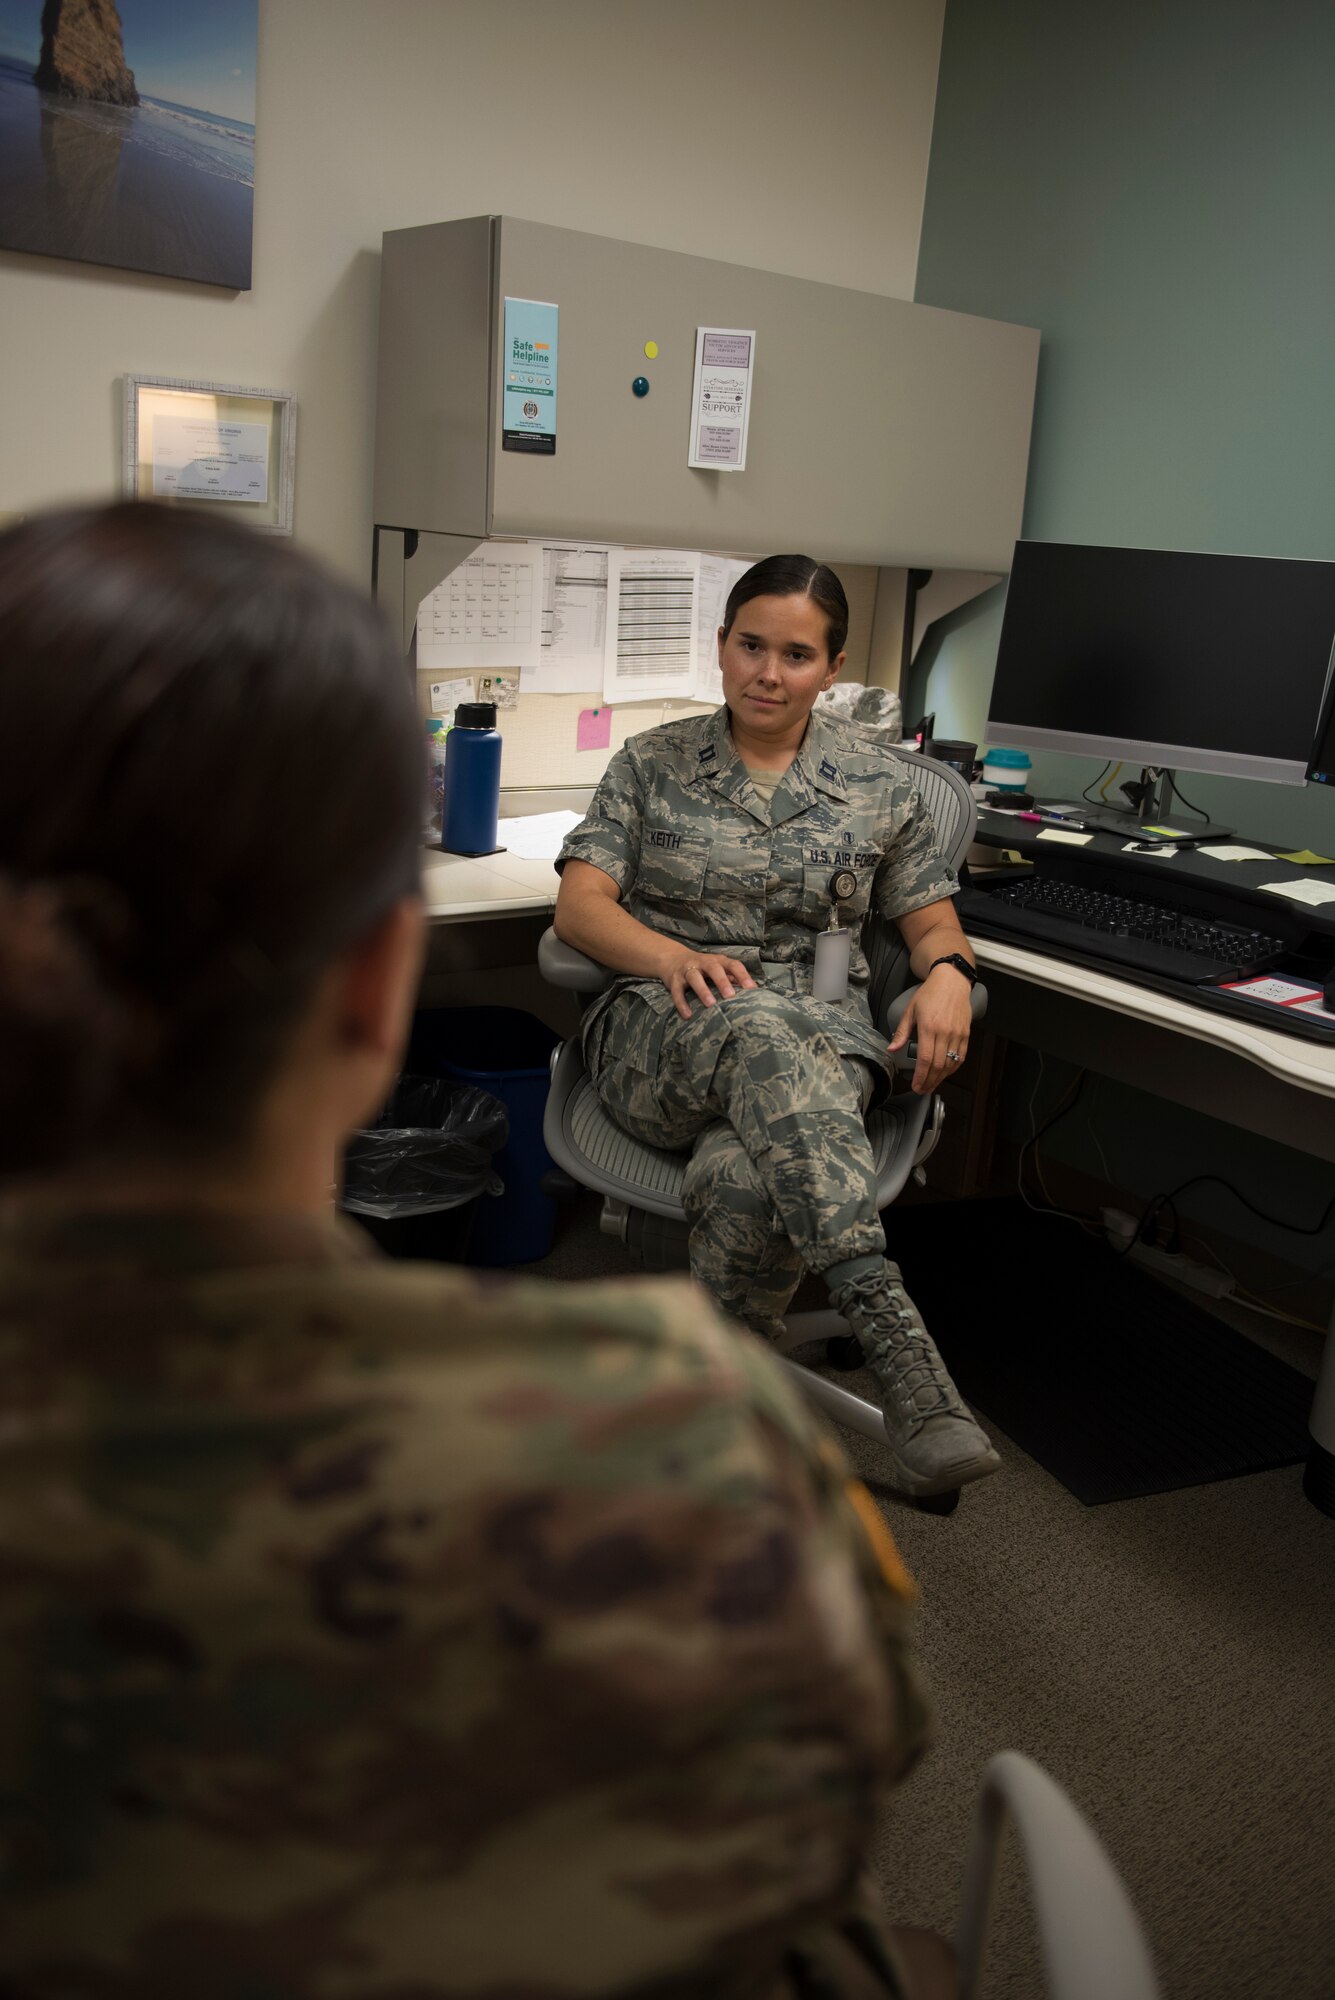 Capt. Felicia Keith, 60th Medical Operations Squadron director of psychological health, listens to one of her patients during a treatment session at David Grant USAF Medical Center at Travis Air Force Base, Calif., June 25, 2018. Keith and her team of professionals have treated more than 200 people who displayed post-traumatic stress symptoms over the past year. Badge blurred for security reasons. (U.S. Air Force photo by Tech. Sgt. James Hodgman)